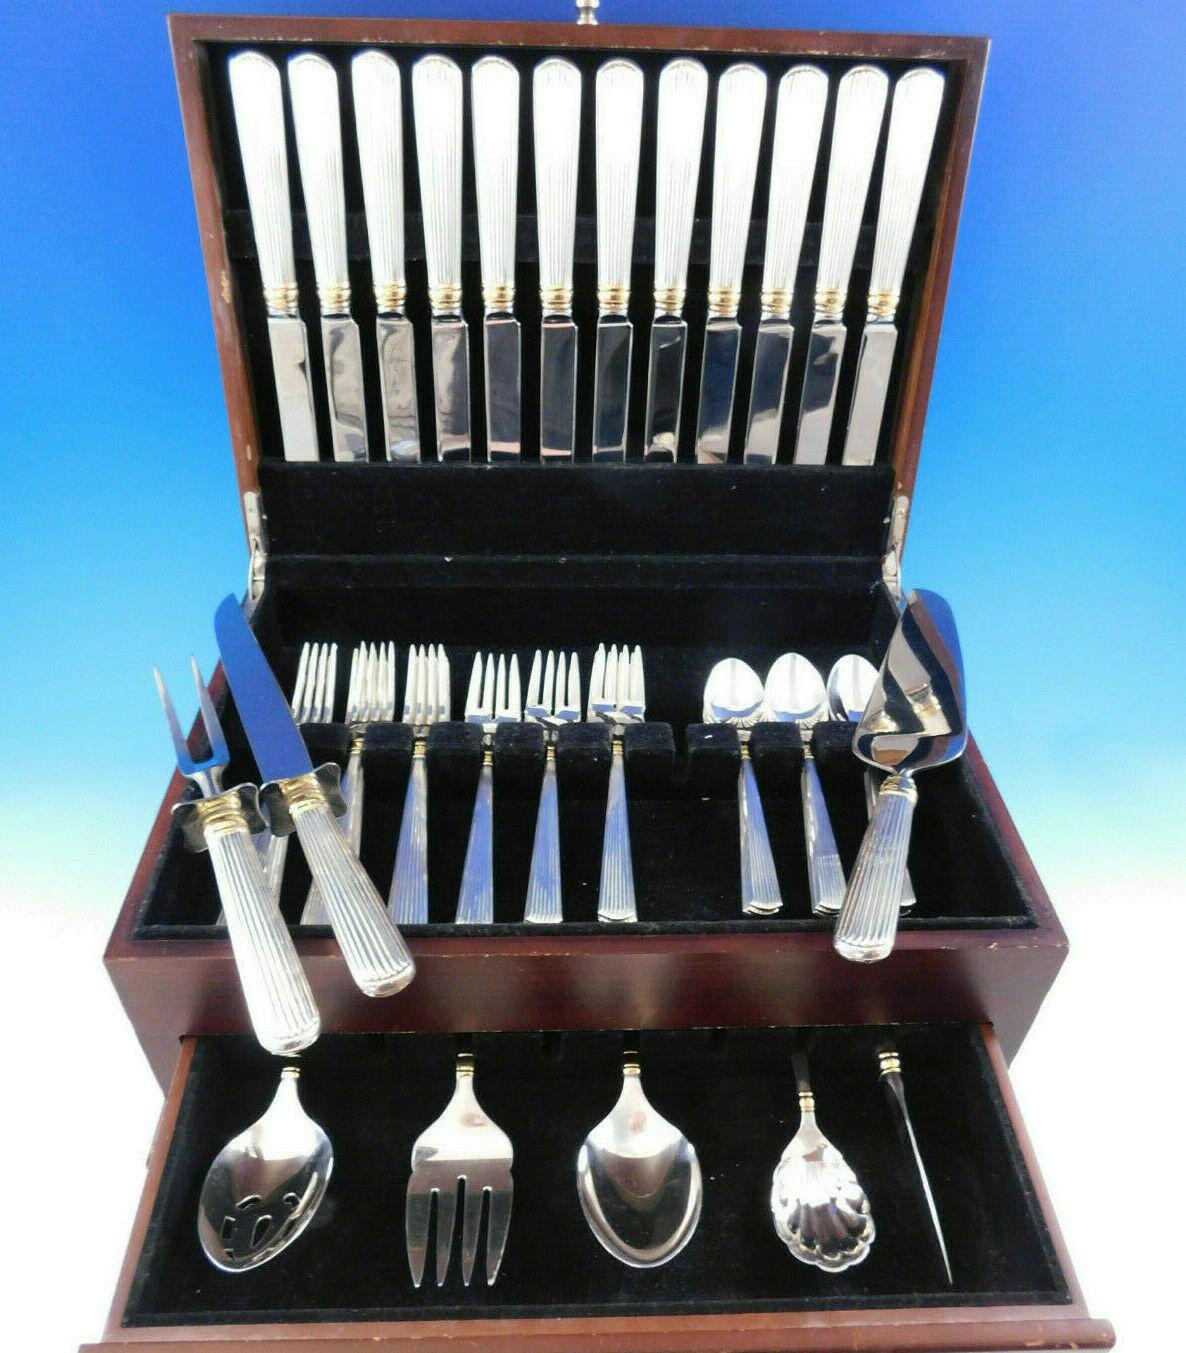 Dinner size ashmont gold by Reed & Barton sterling silver flatware set, 56 pieces. This set includes:

12 dinner size knives, 9 7/8